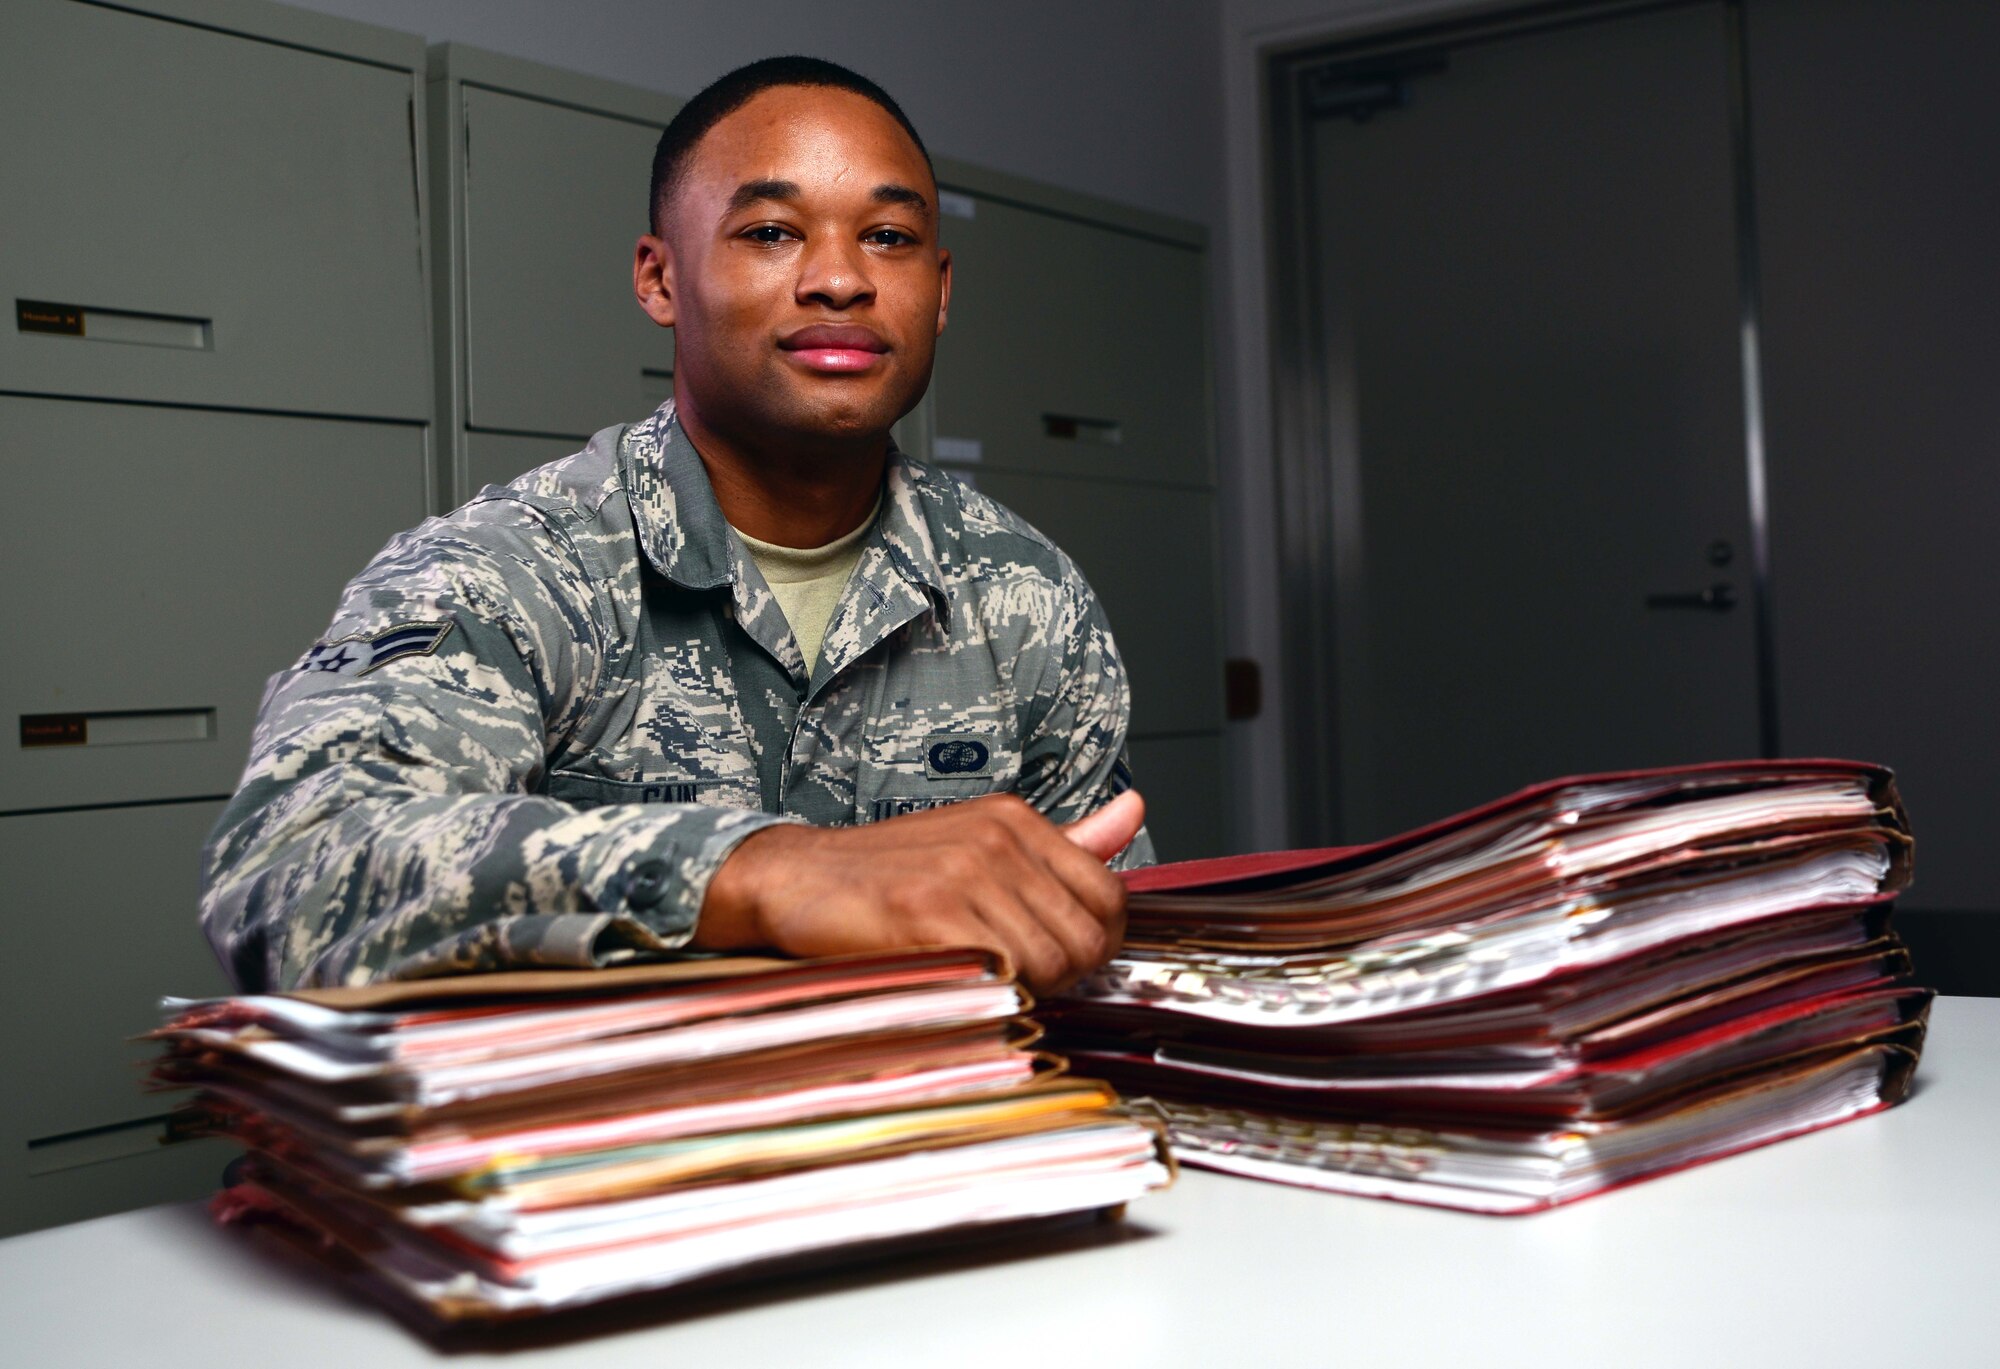 Airman 1st Class Teante Cain, 35th Contracting Squadron contracting specialist, sits with a stack of contracts he processed at Misawa Air Base, Japan, July 14, 2014. Cain manages and administrates multiple contracts for several units on a daily basis, and was named Misawa's Wild Weasel of the Week. (U.S. Air Force photo/Senior Airman Derek VanHorn)